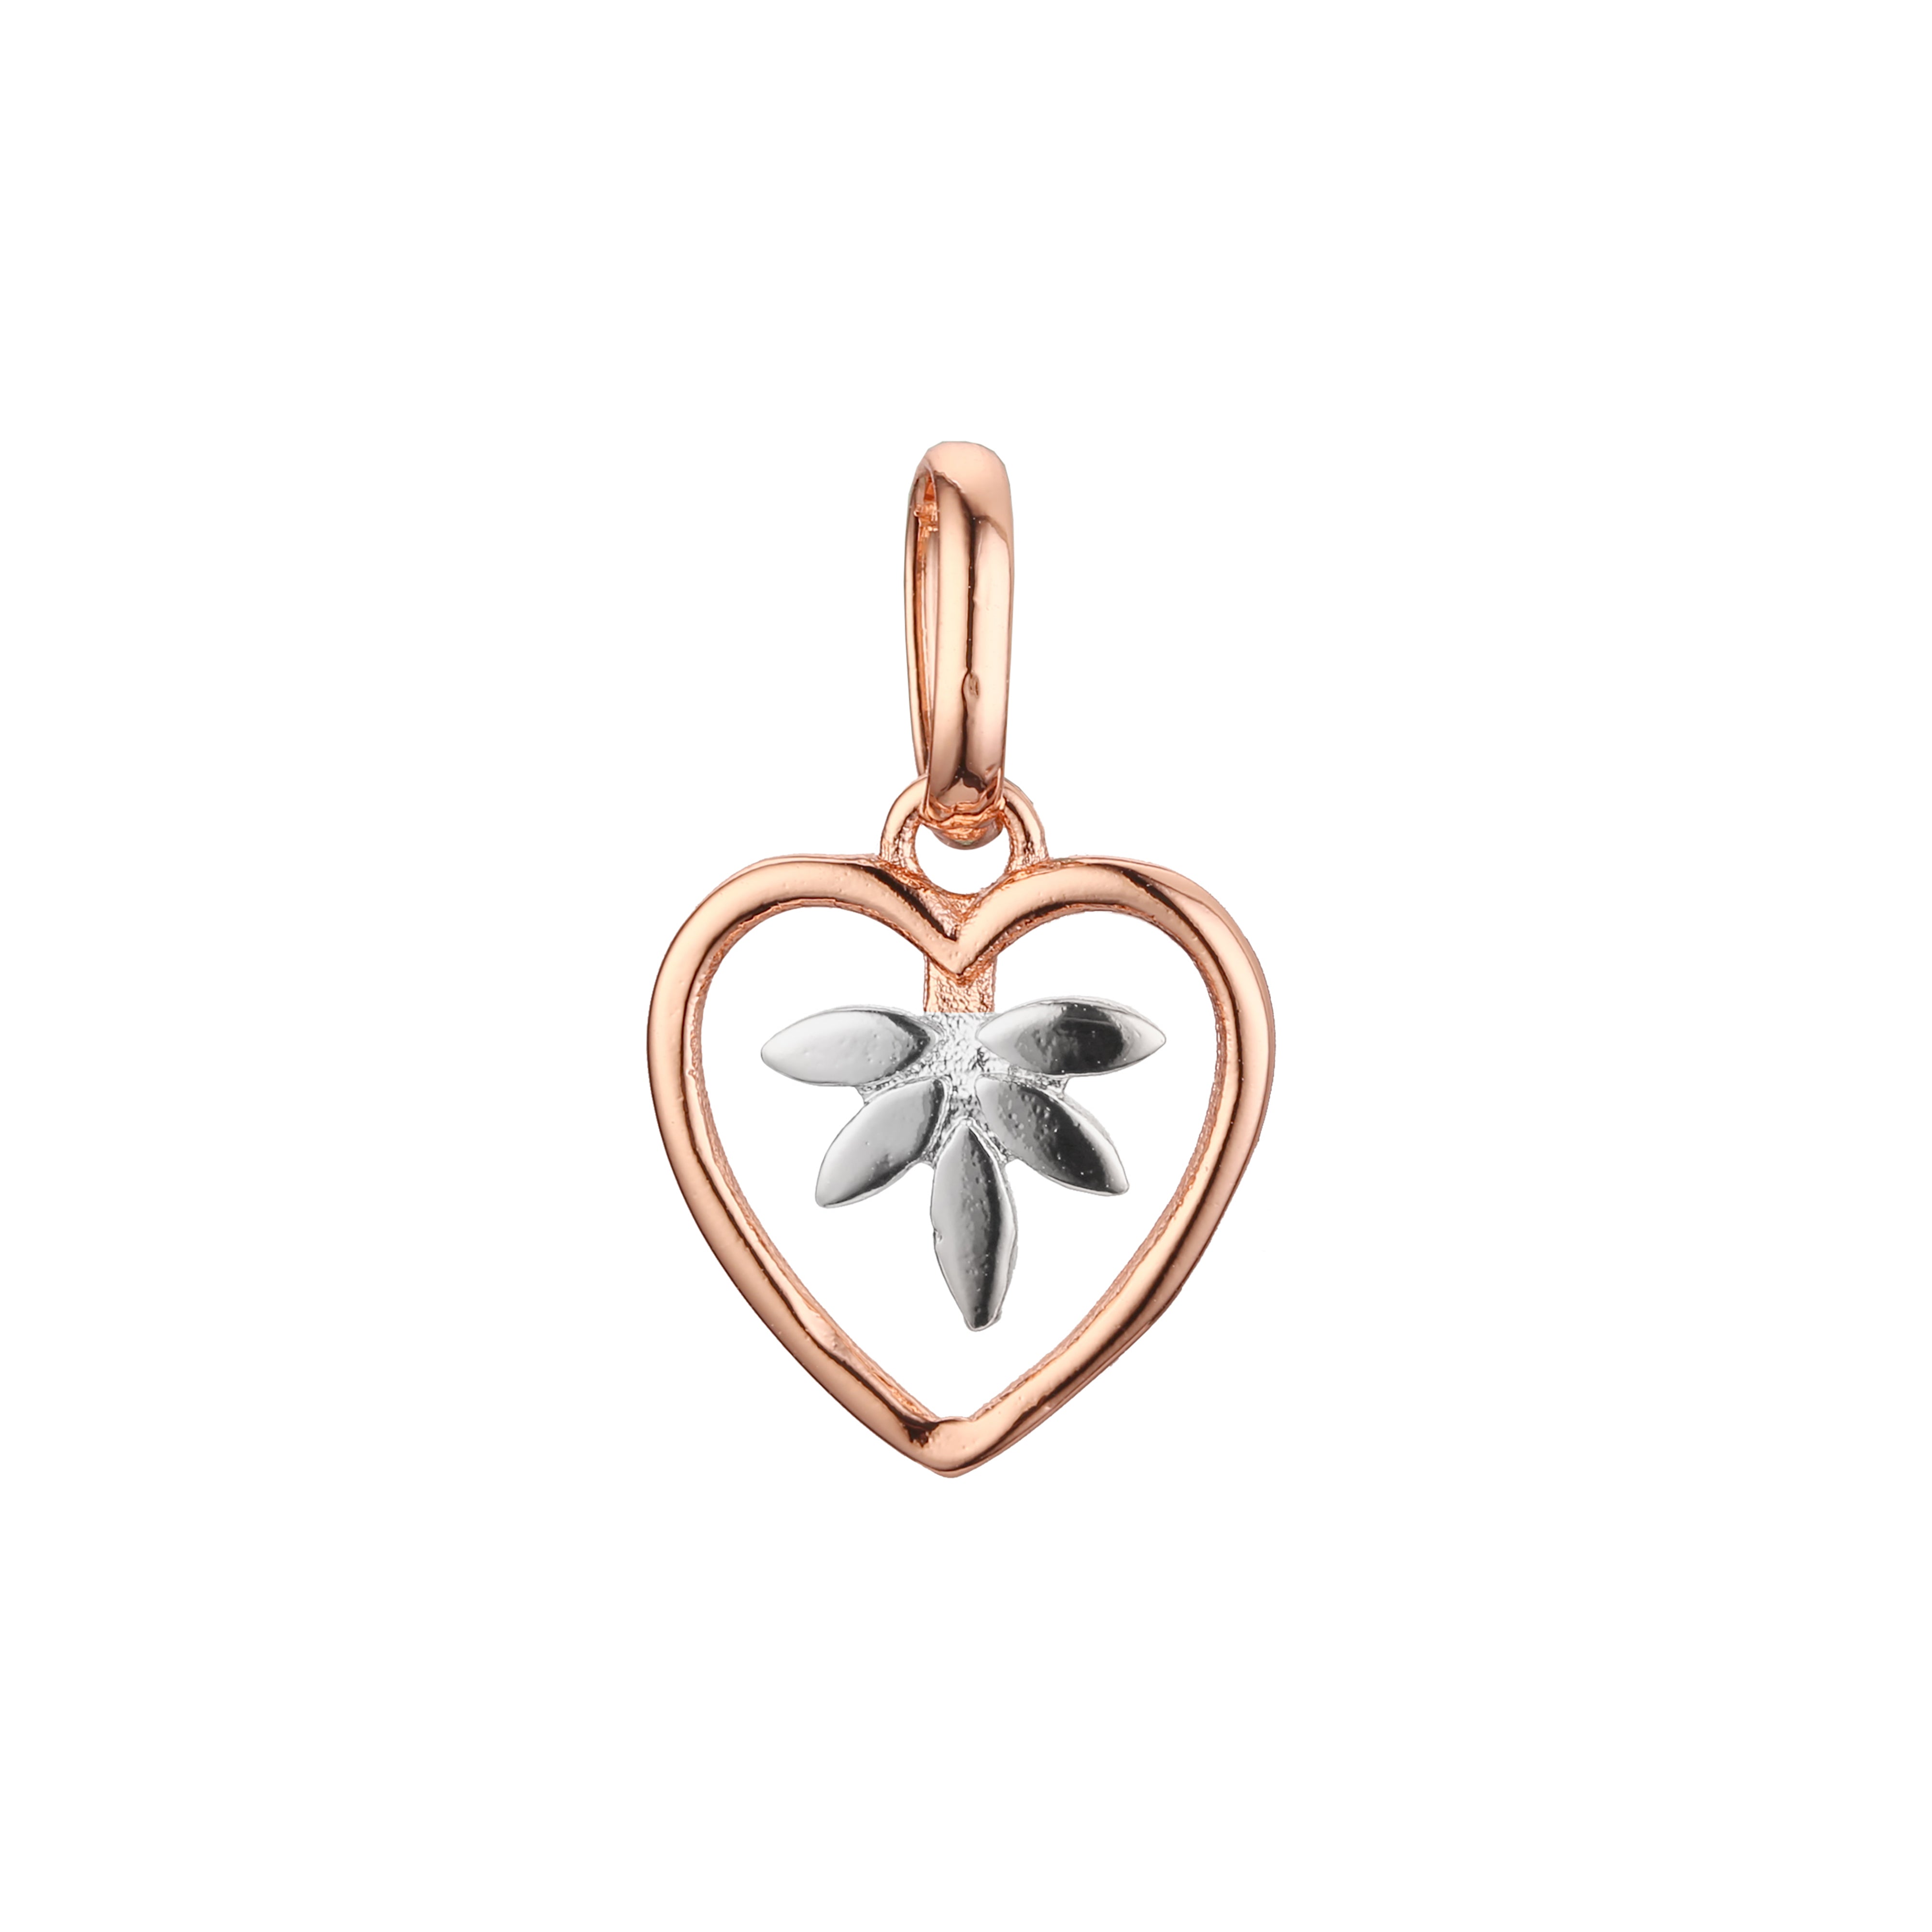 Heart and leaves pendant in Rose Gold two tone, 14K Gold plating colors